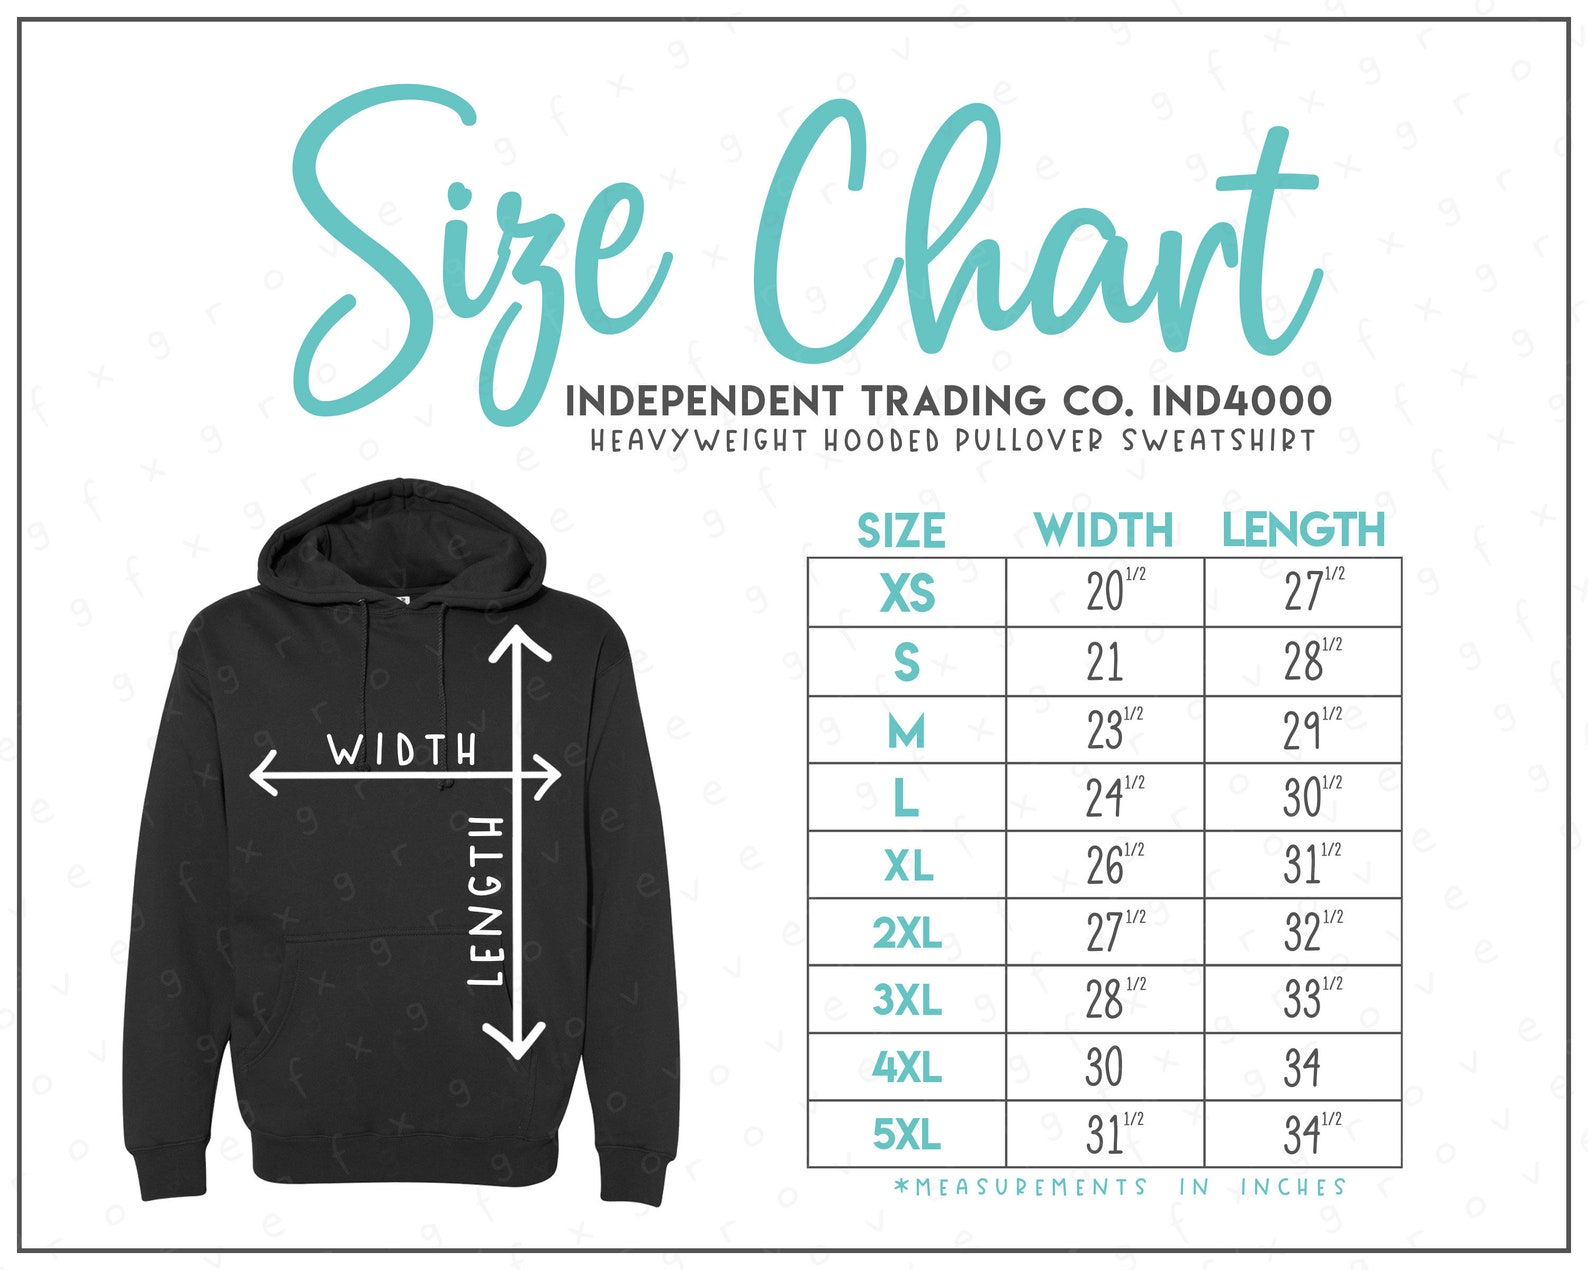 Independent Trading Co. IND4000 Size Chart Independent - Etsy